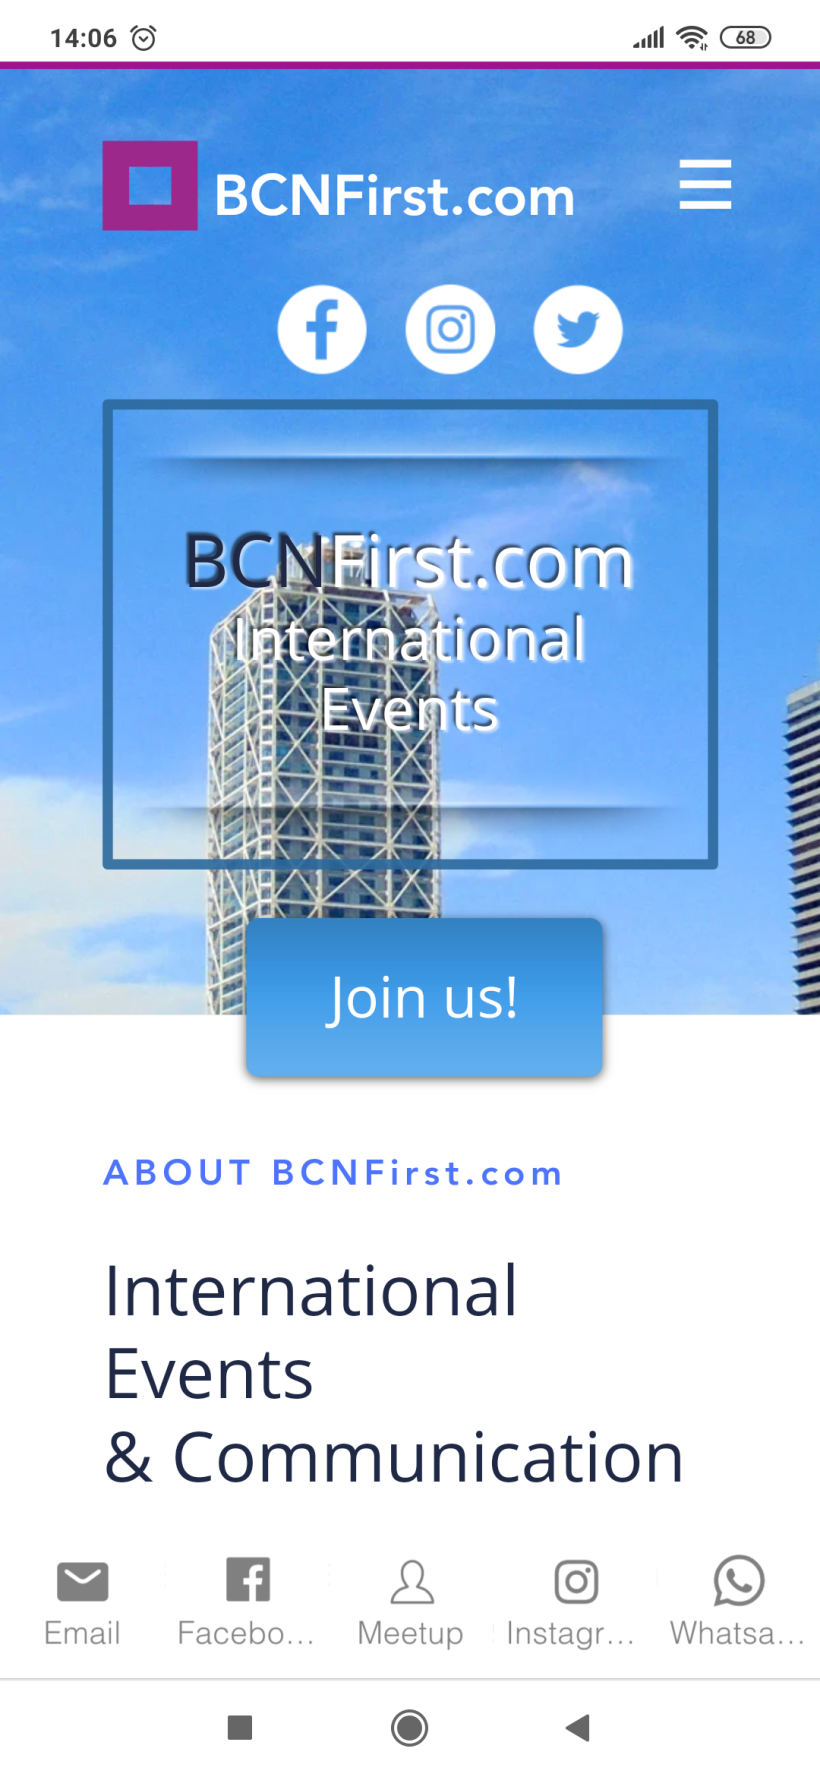 BCNFirst.com for Mobile Devices and Social Networks